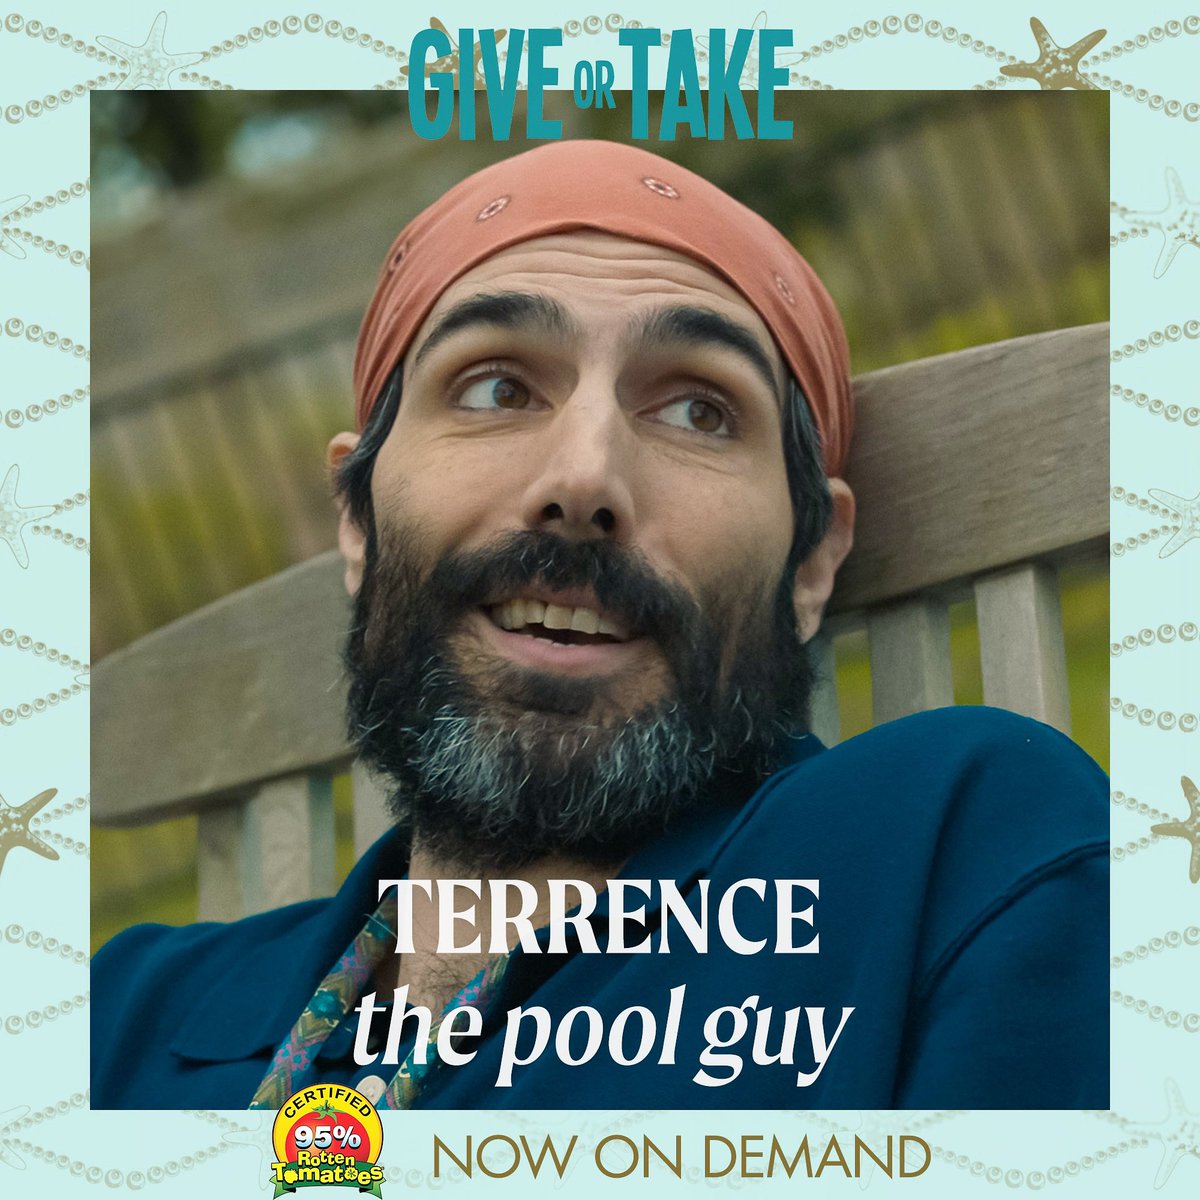 🕳️“It’s good being in a hole sometimes… Look at the world from ground-level” 
🧐
Learn more of the philosophy of Terrence… On-Demand everywhere:

linktr.ee/giveortakemovie

#giveortakemovie #breakingglasspictures #louiscancelmi #poolguy #actorlife #indiefilm #lgbtqfilm #pride